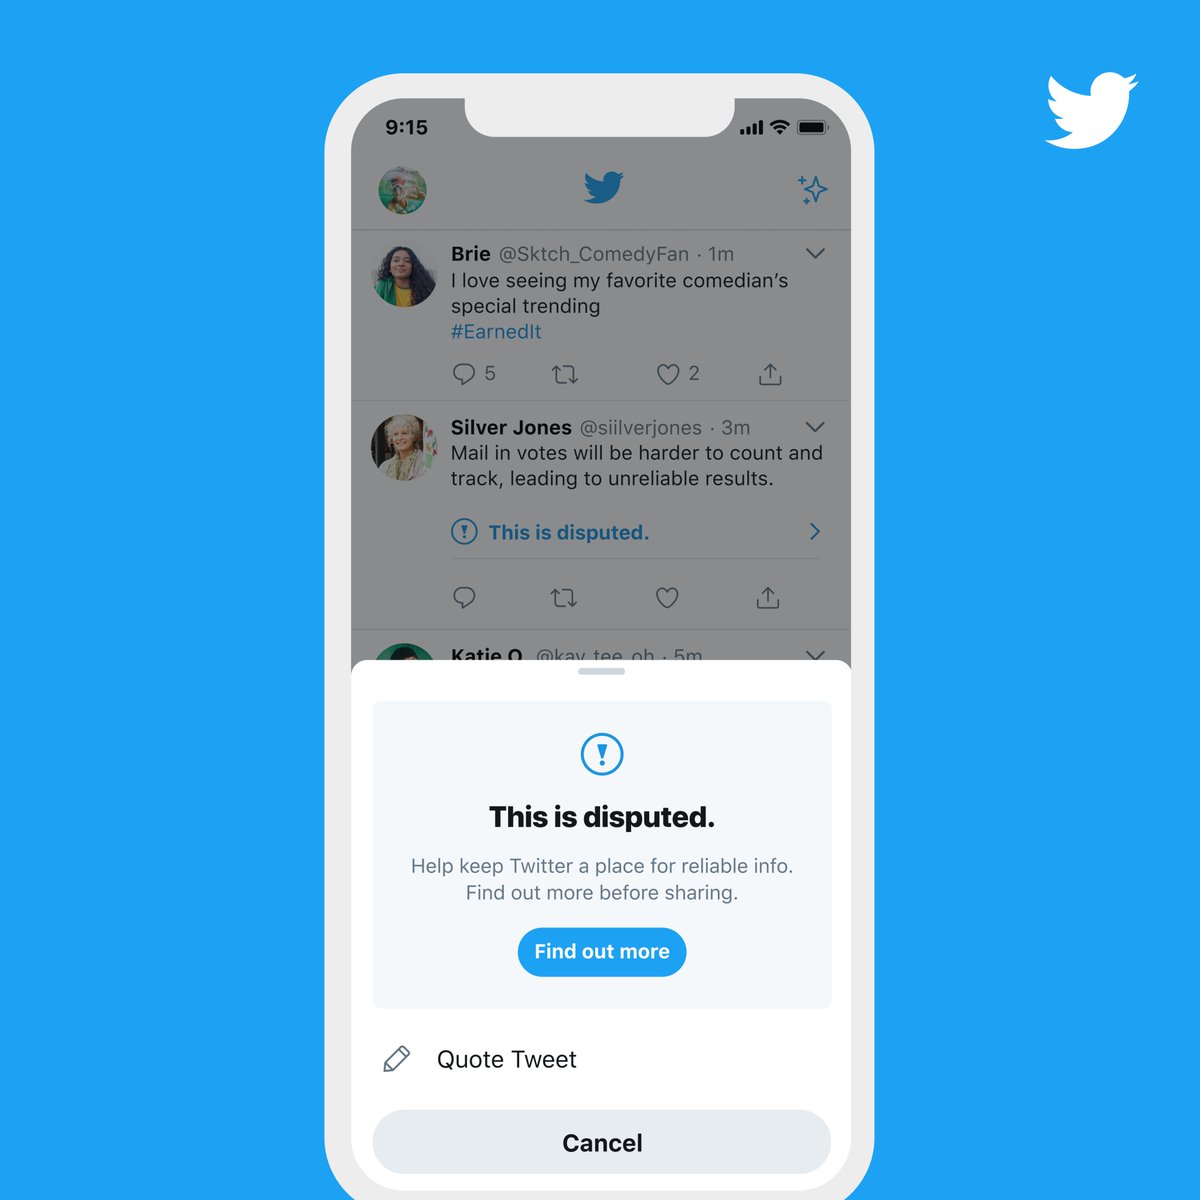 Starting next week, when people attempt to Retweet a Tweet with a misleading information label, they will see a prompt directing them to credible information about the topic before they can amplify it.